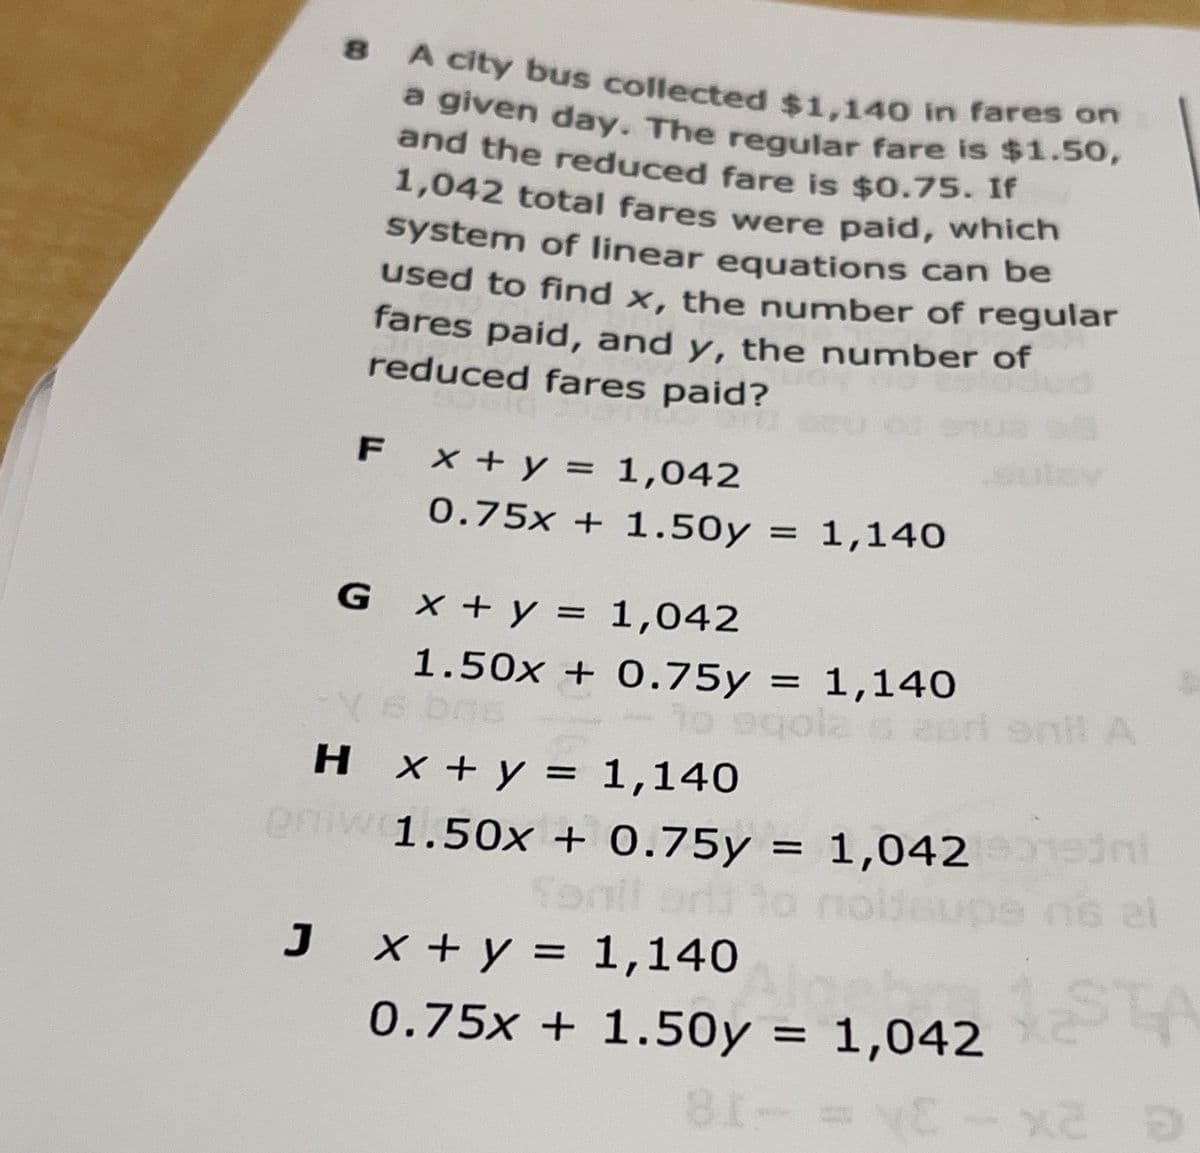 a given day. The regular fare is $1.50,
A city bus collected $1,140 in fares on
a given day. The regular fare is $1.50,
and the reduced fare is $0.75. Ir
1,042 total fares were paid, which
system of linear equations can be
used to find x, the number of regular
fares paid, and y, the number of
reduced fares paid?
F x +y = 1,042
0.75x + 1.50y = 1,140
G x +y = 1,042
1.50x + 0.75y = 1,140
2erl enil A
H x + y = 1,140
eniw
1.50x + 0.75y = 1,042 ed
To
J
x + y = 1,140
0.75x + 1.50y = 1,042
81-
